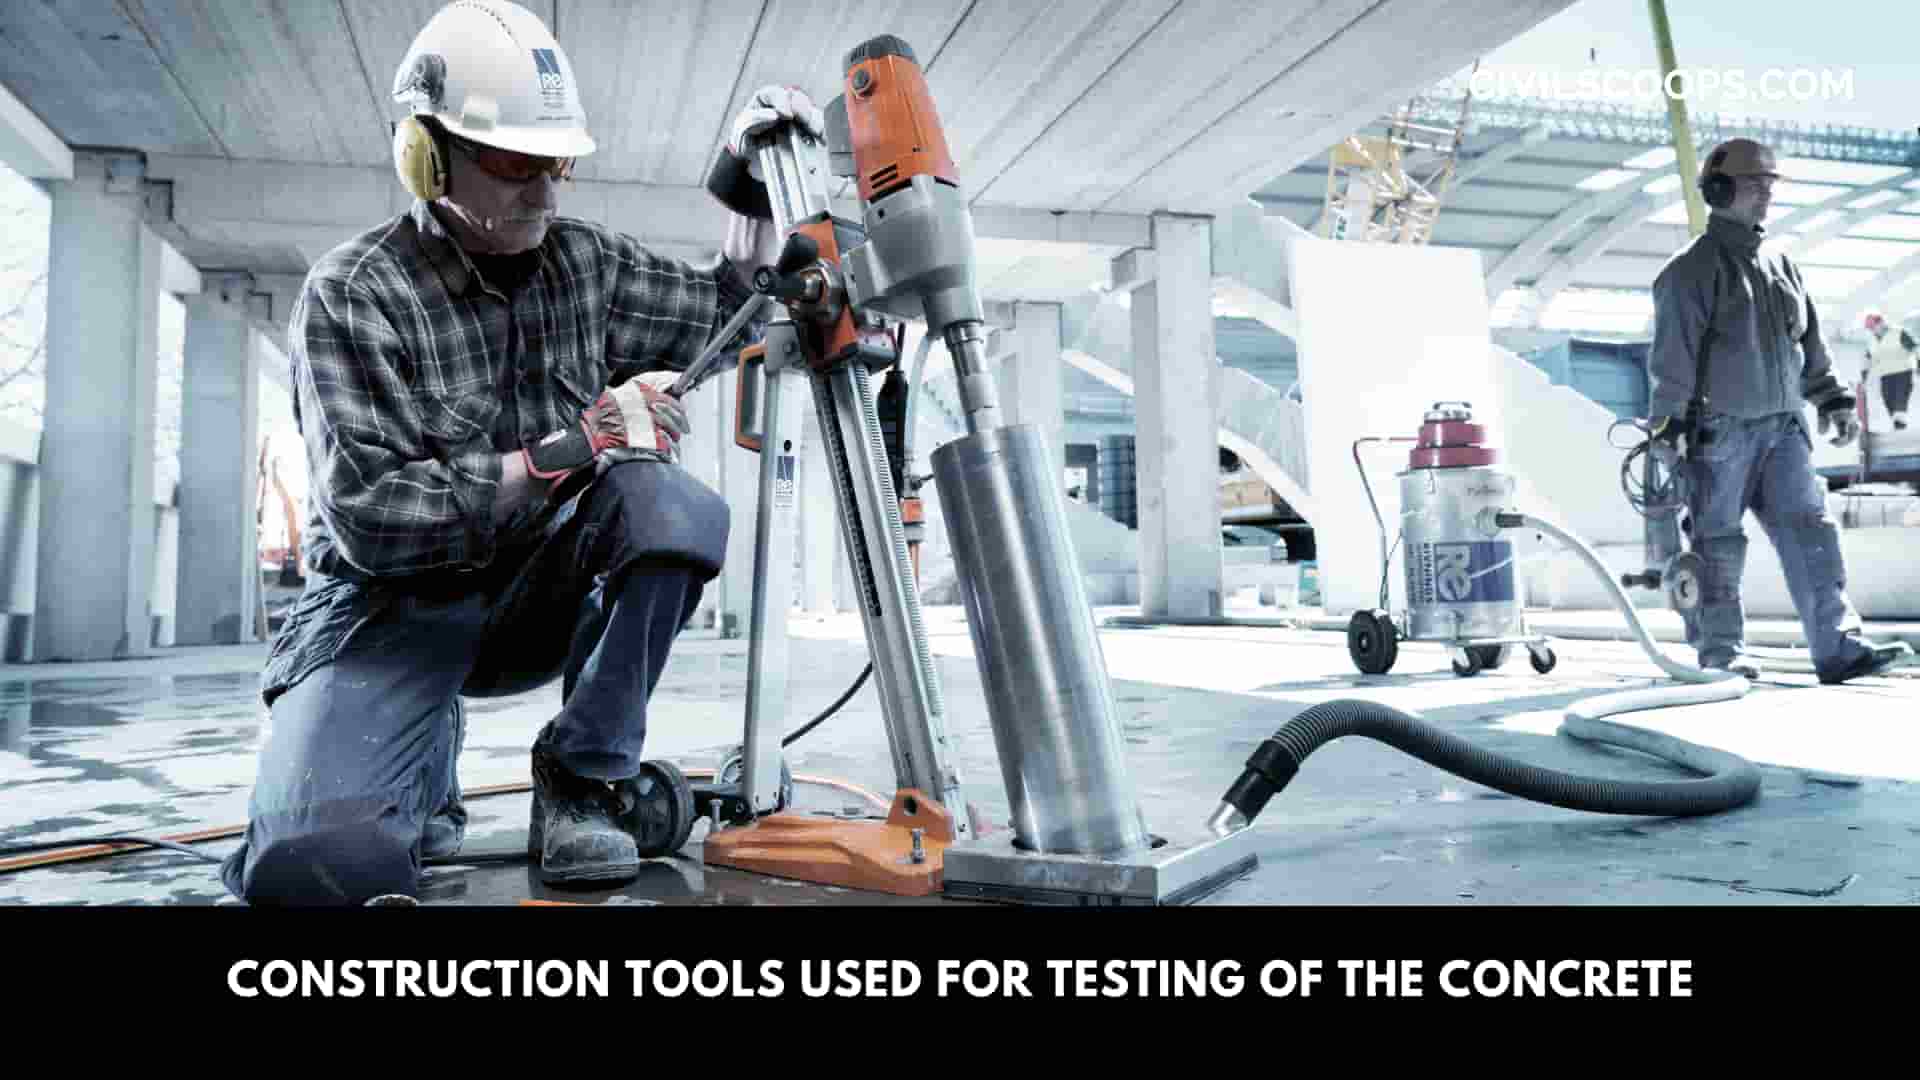 Construction Tools Used for Testing of the Concrete